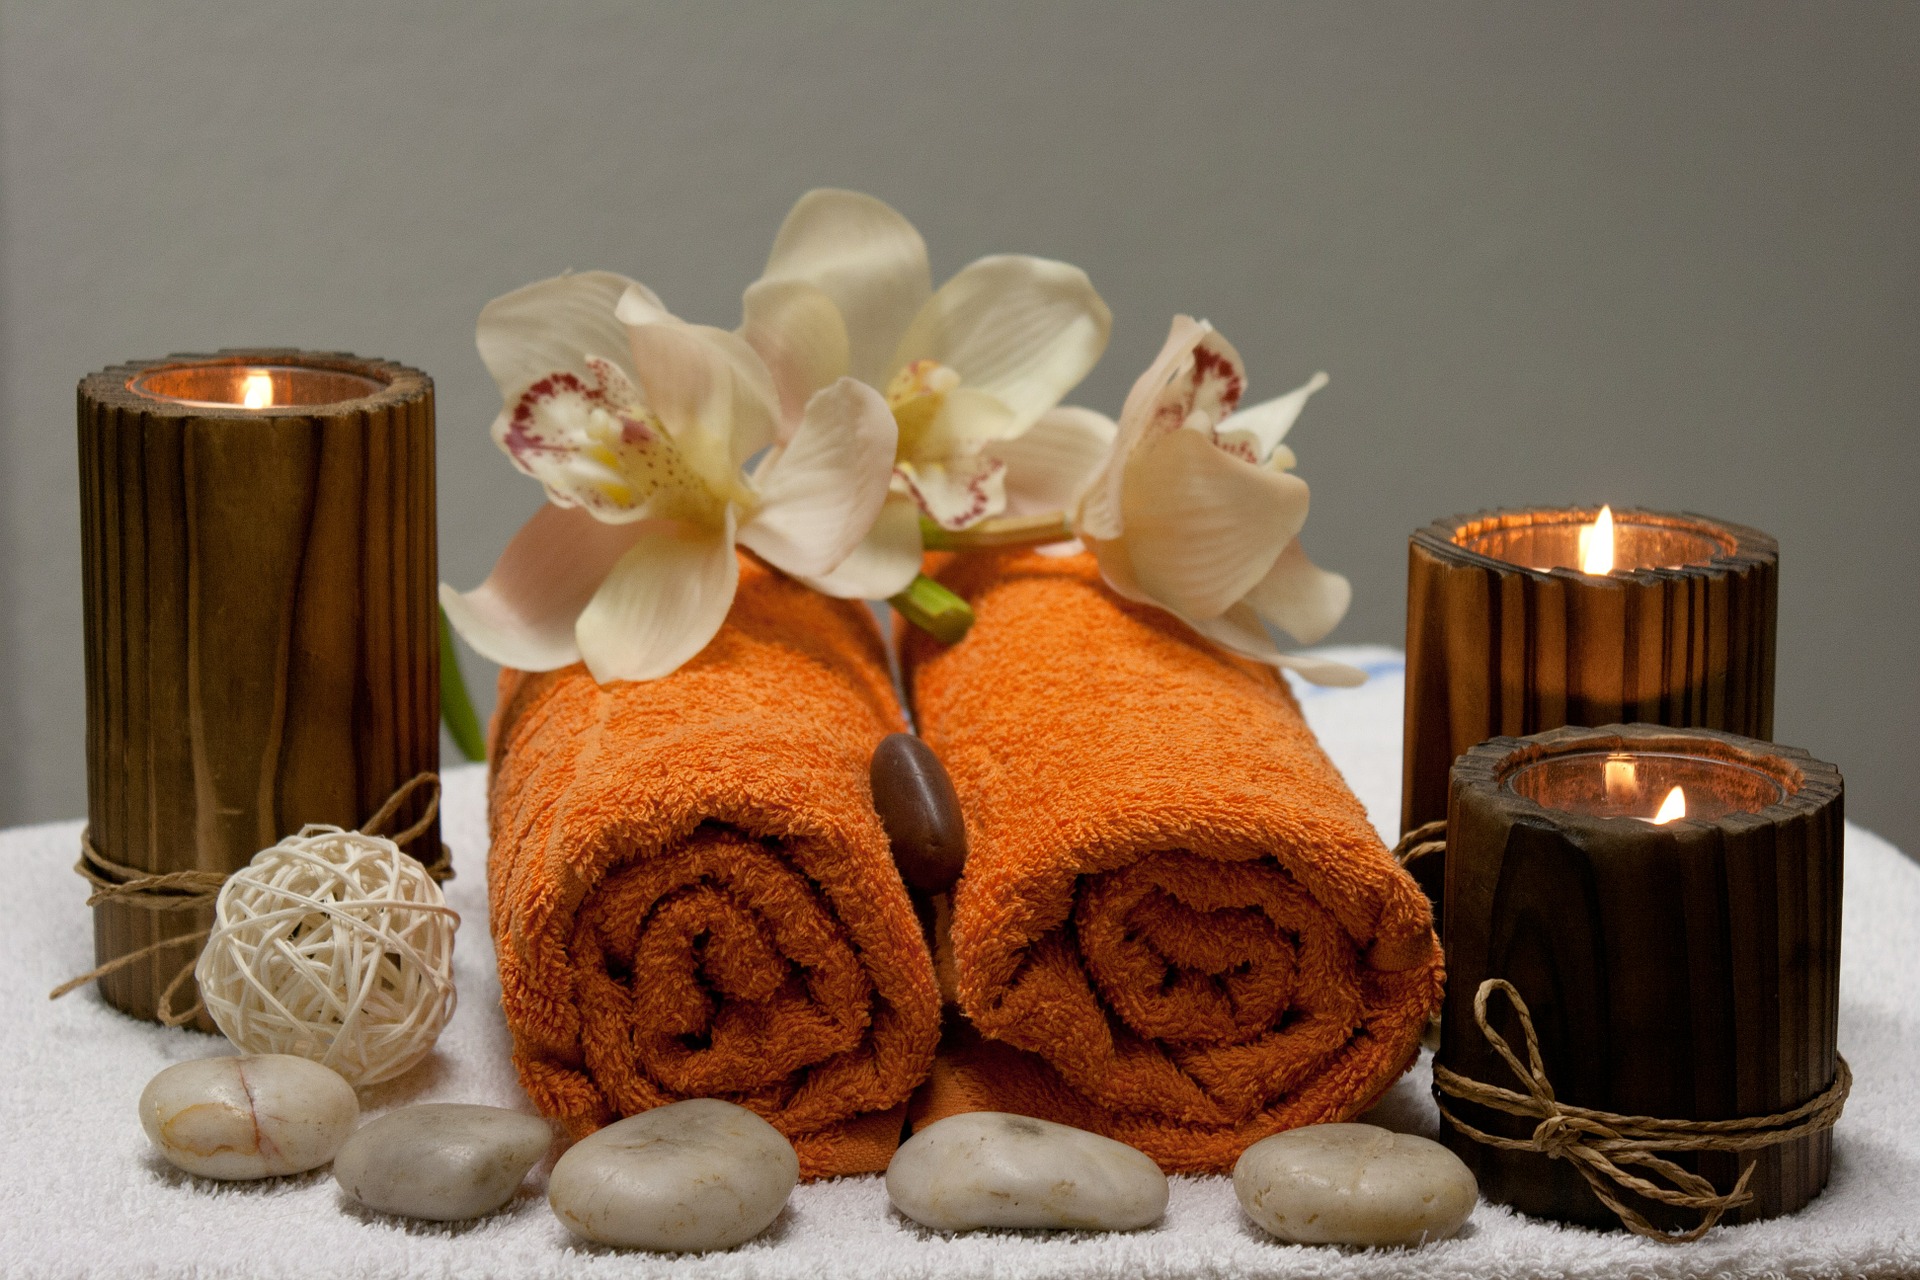 Albany Creek Massage and Day Spa